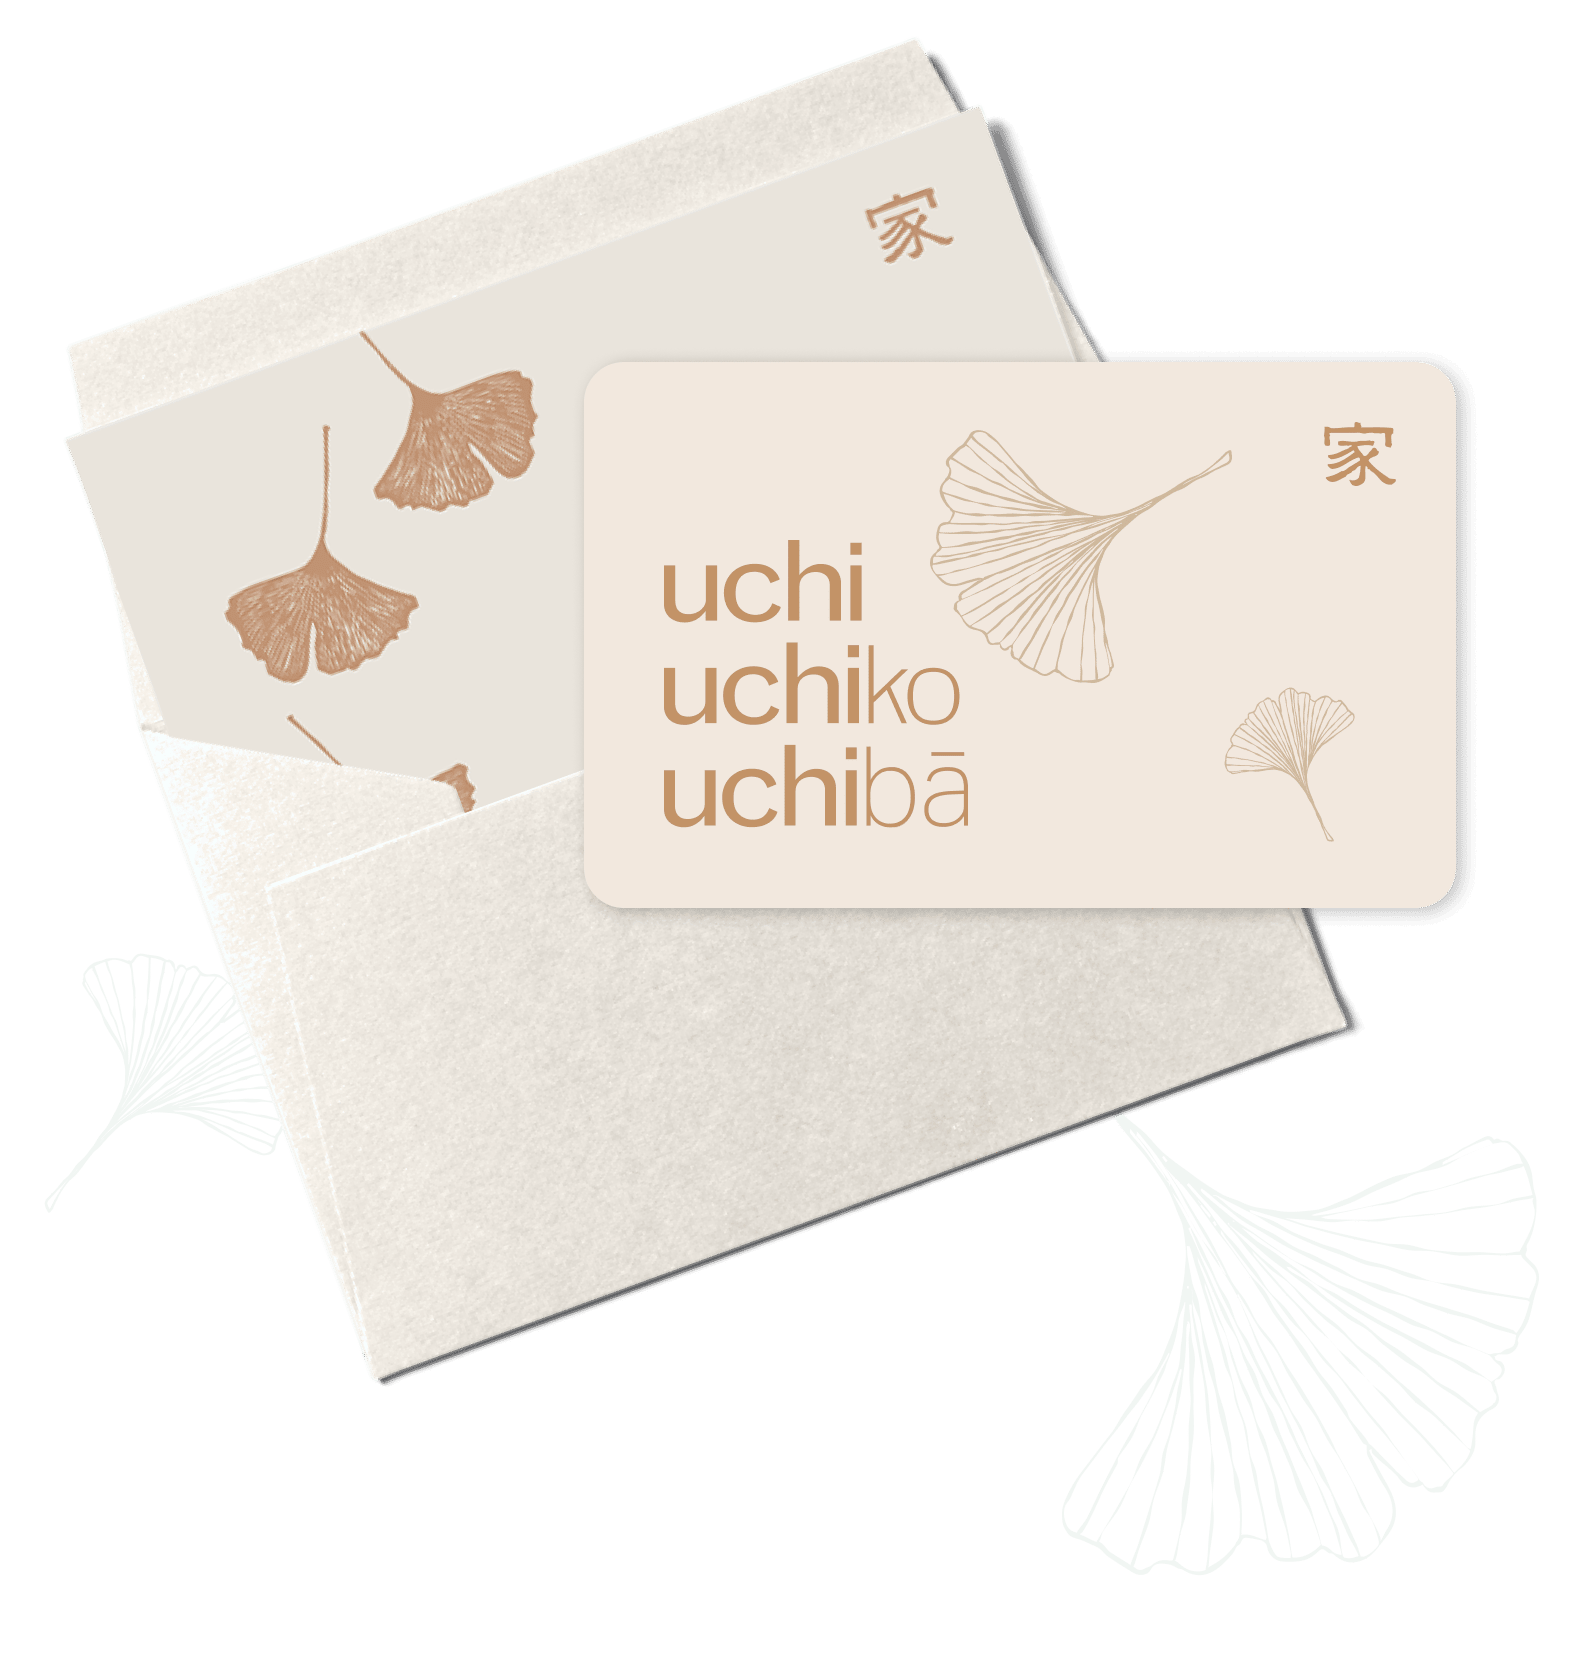 An envelope containing a gift card that can be redeemed at Uchi, Uchiko, or Uchiba.